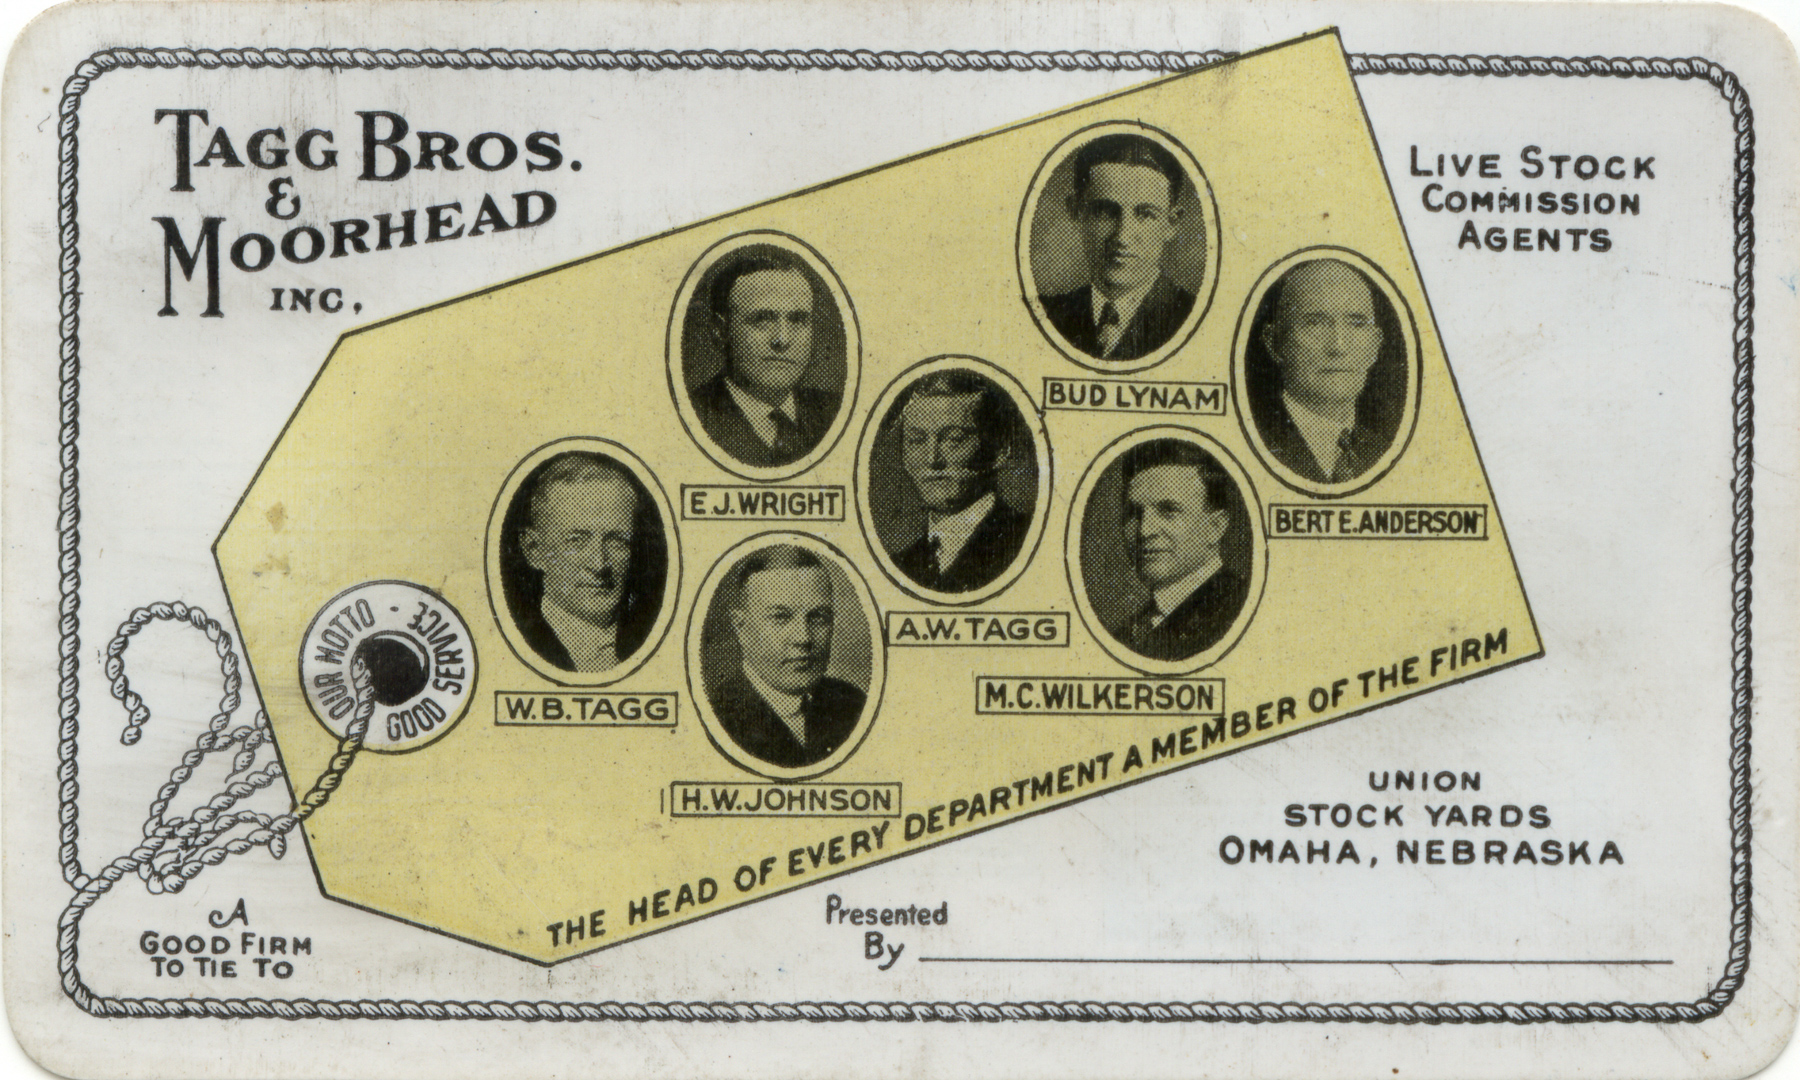 Tagg Bros. & Moorehead Inc., Live Stock Commission Agents, Omaha Nebraska [includes images of William & Arthur Tagg]